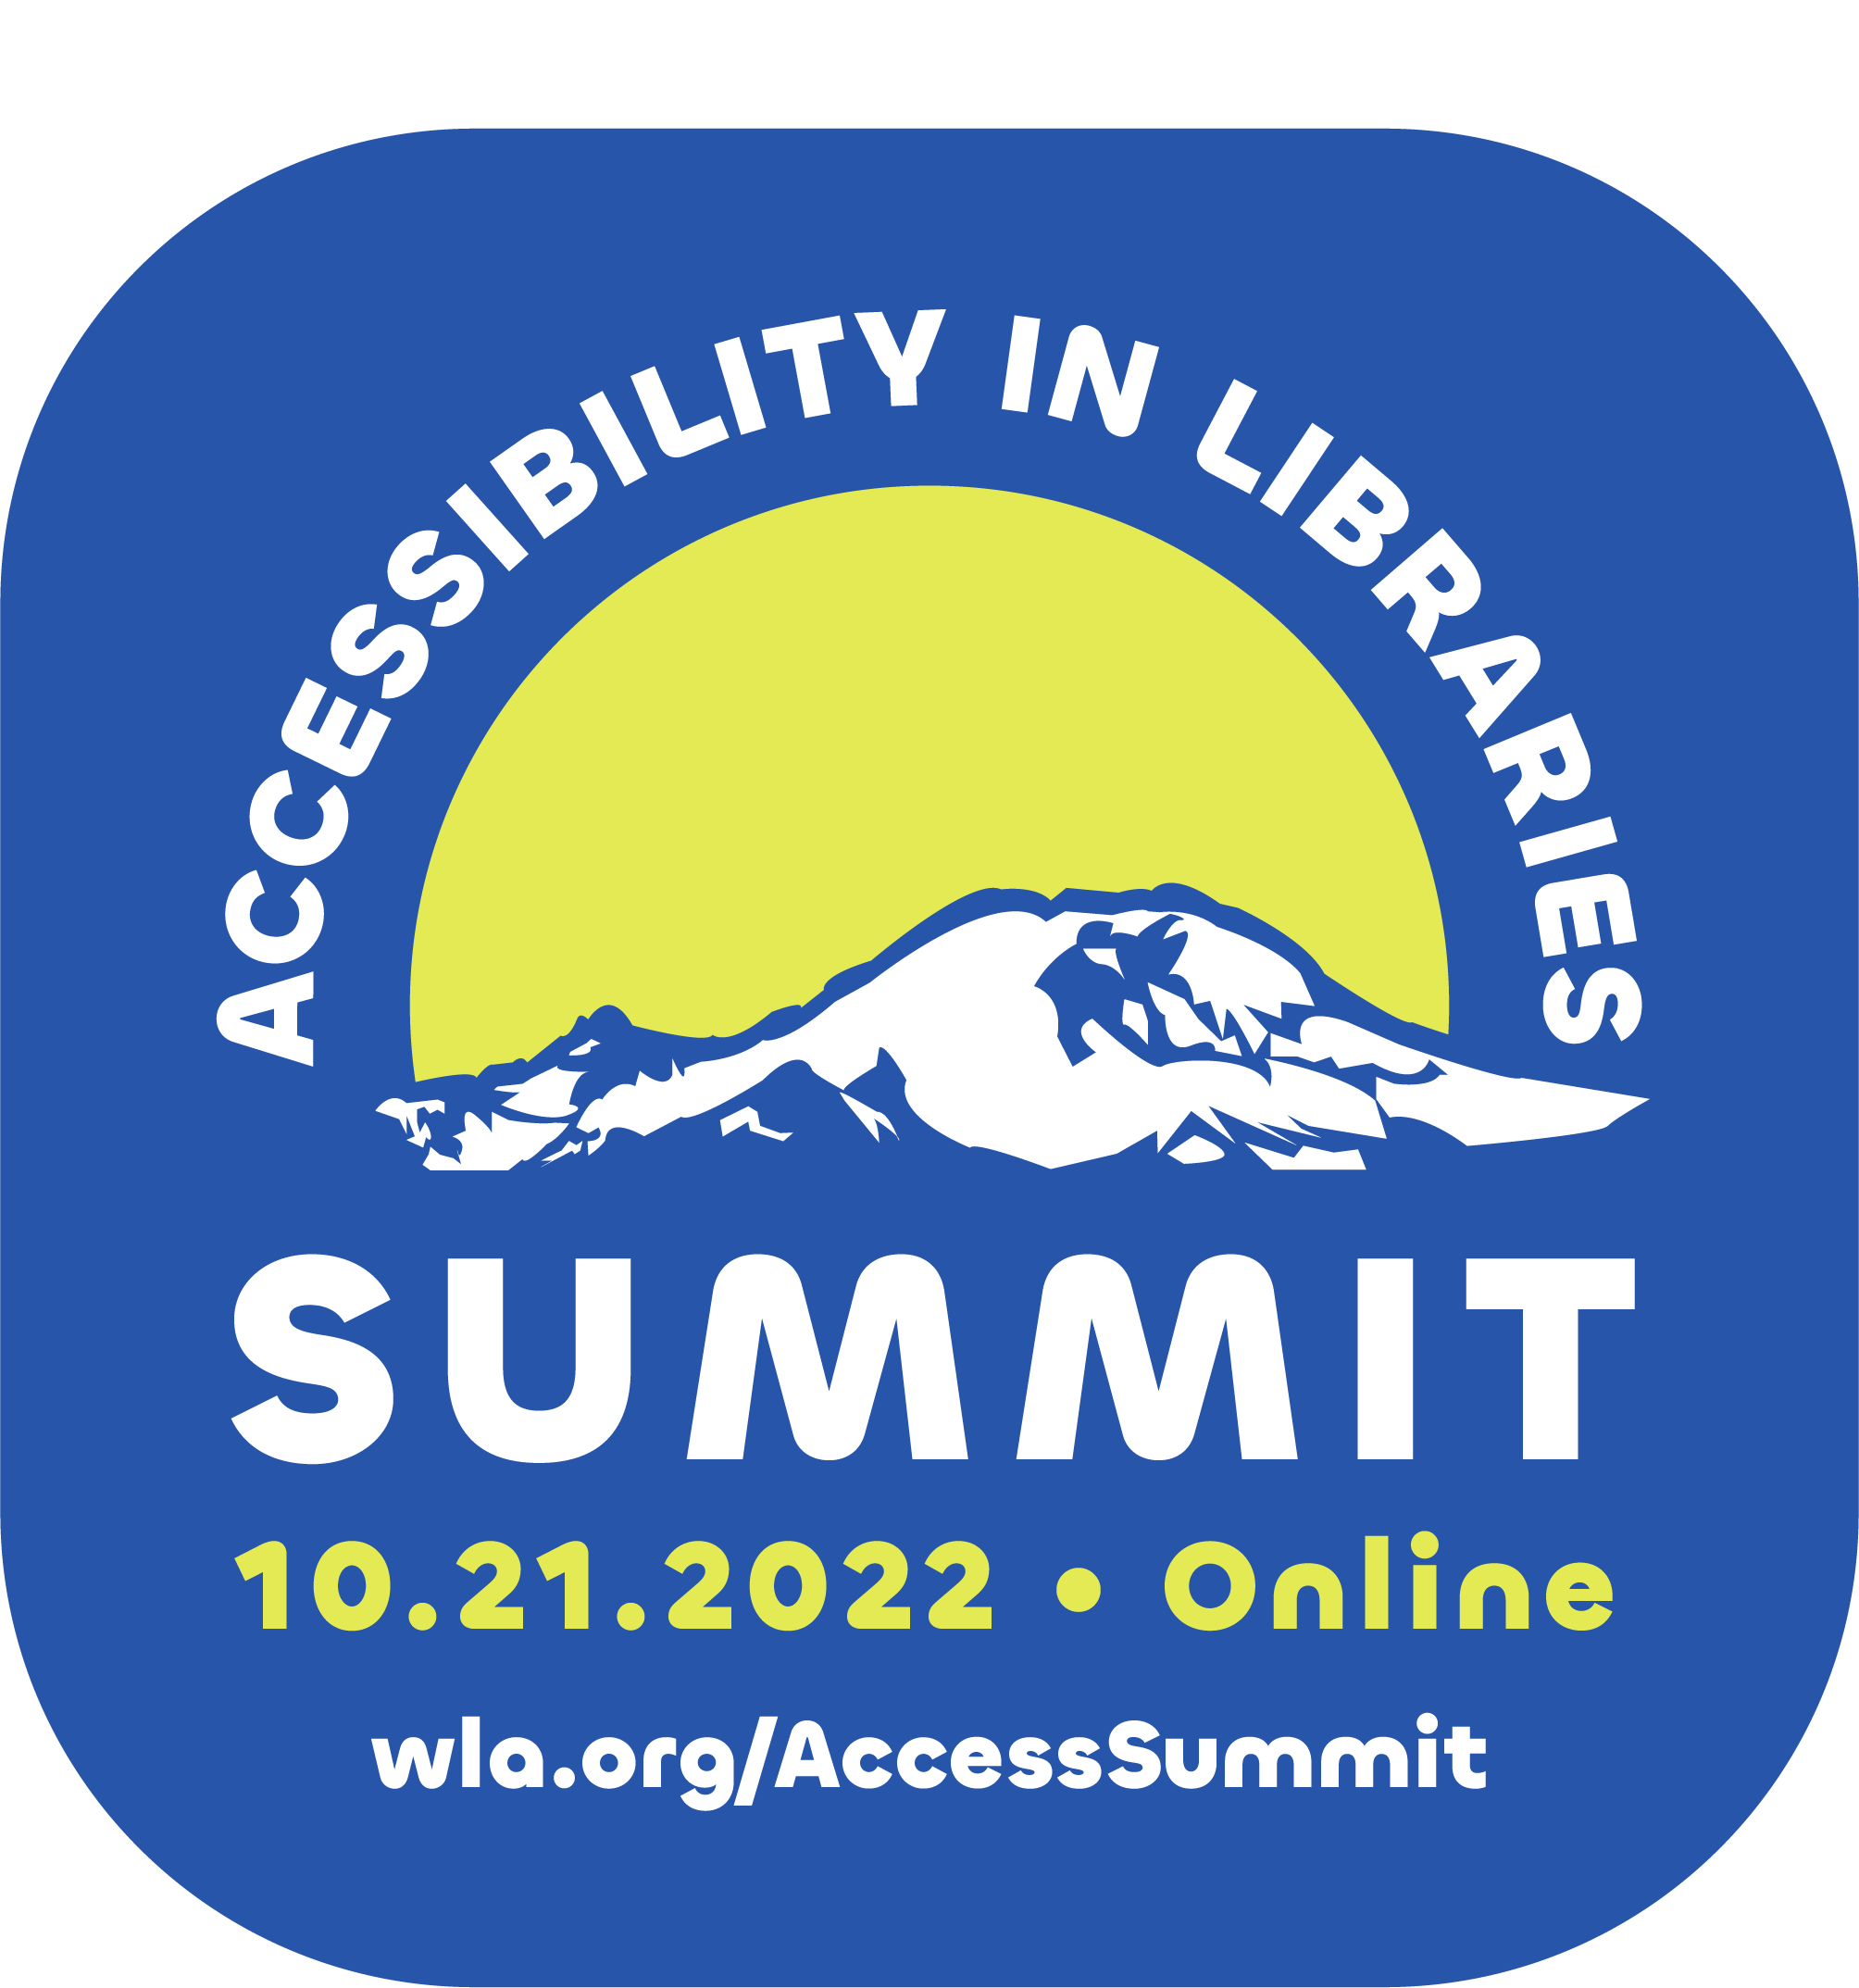 "Event logo. Blue background with white letters, curving over an illustration of Mount Ranier, that read 'Accessibility in Libraries Summit.' In yellow letters underneath, the text reads "10.21.2022 | online.""